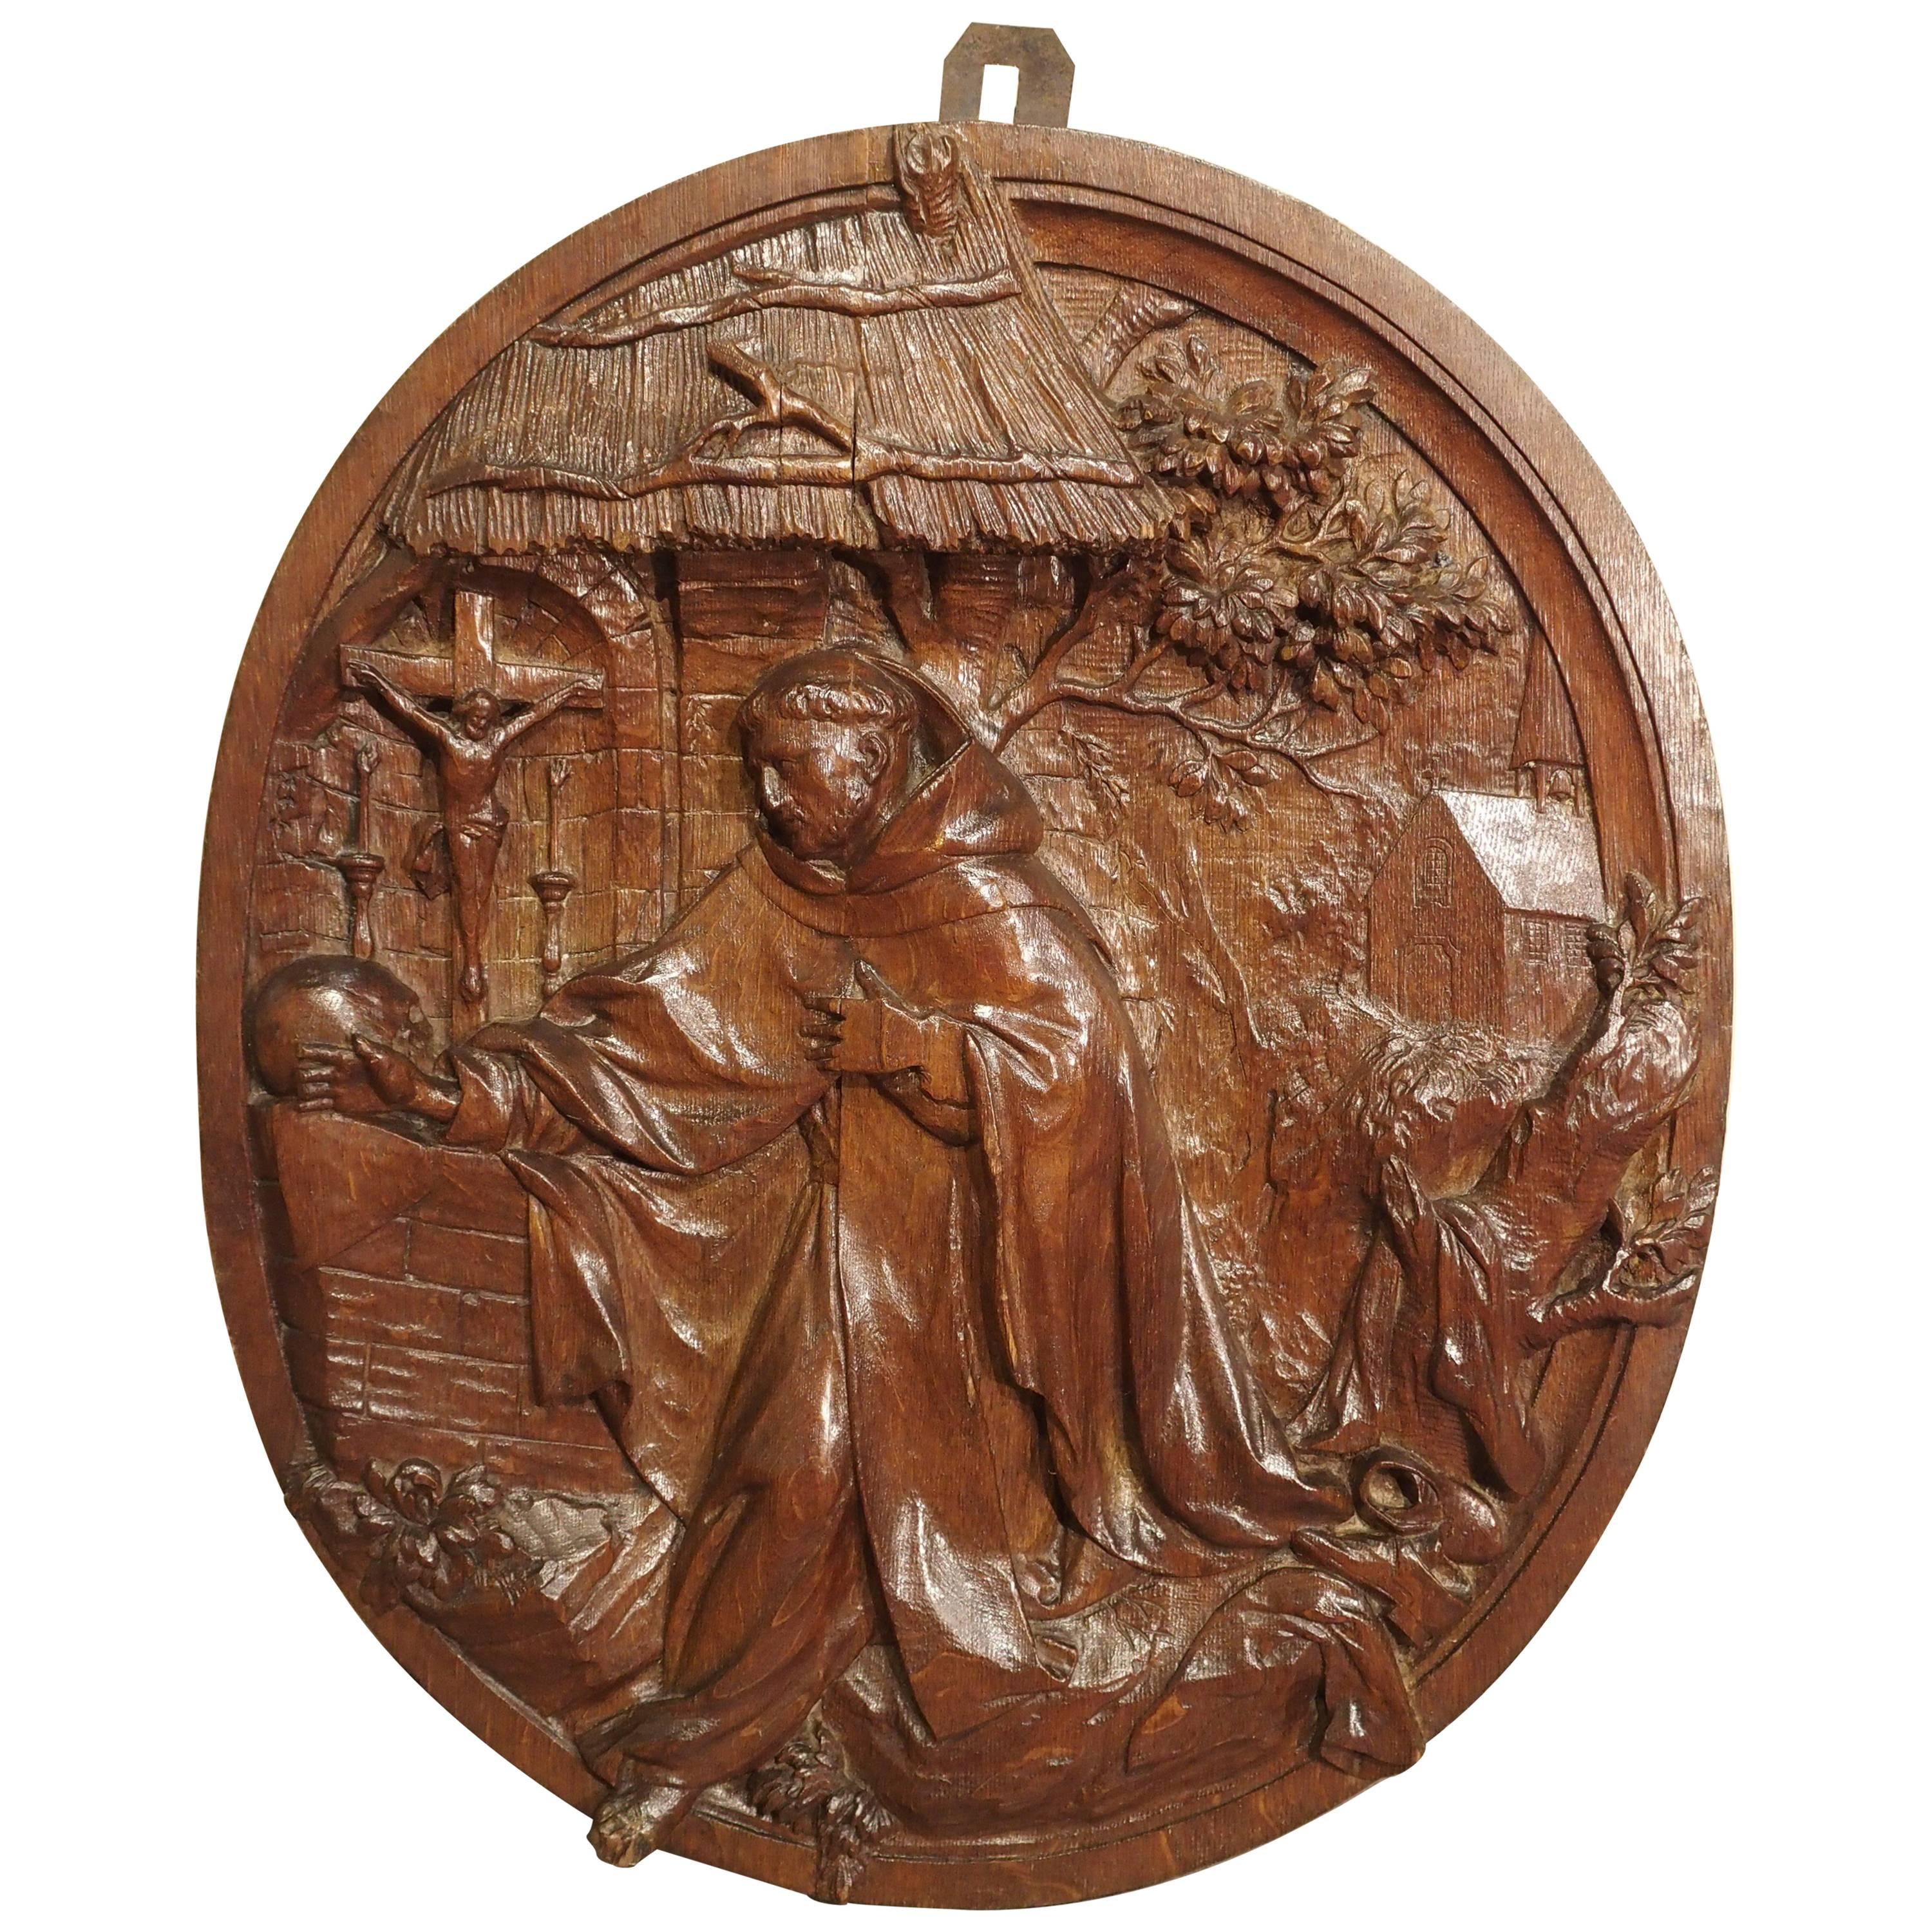 Carved 18th Century Oval Wooden Religious Plaque from France